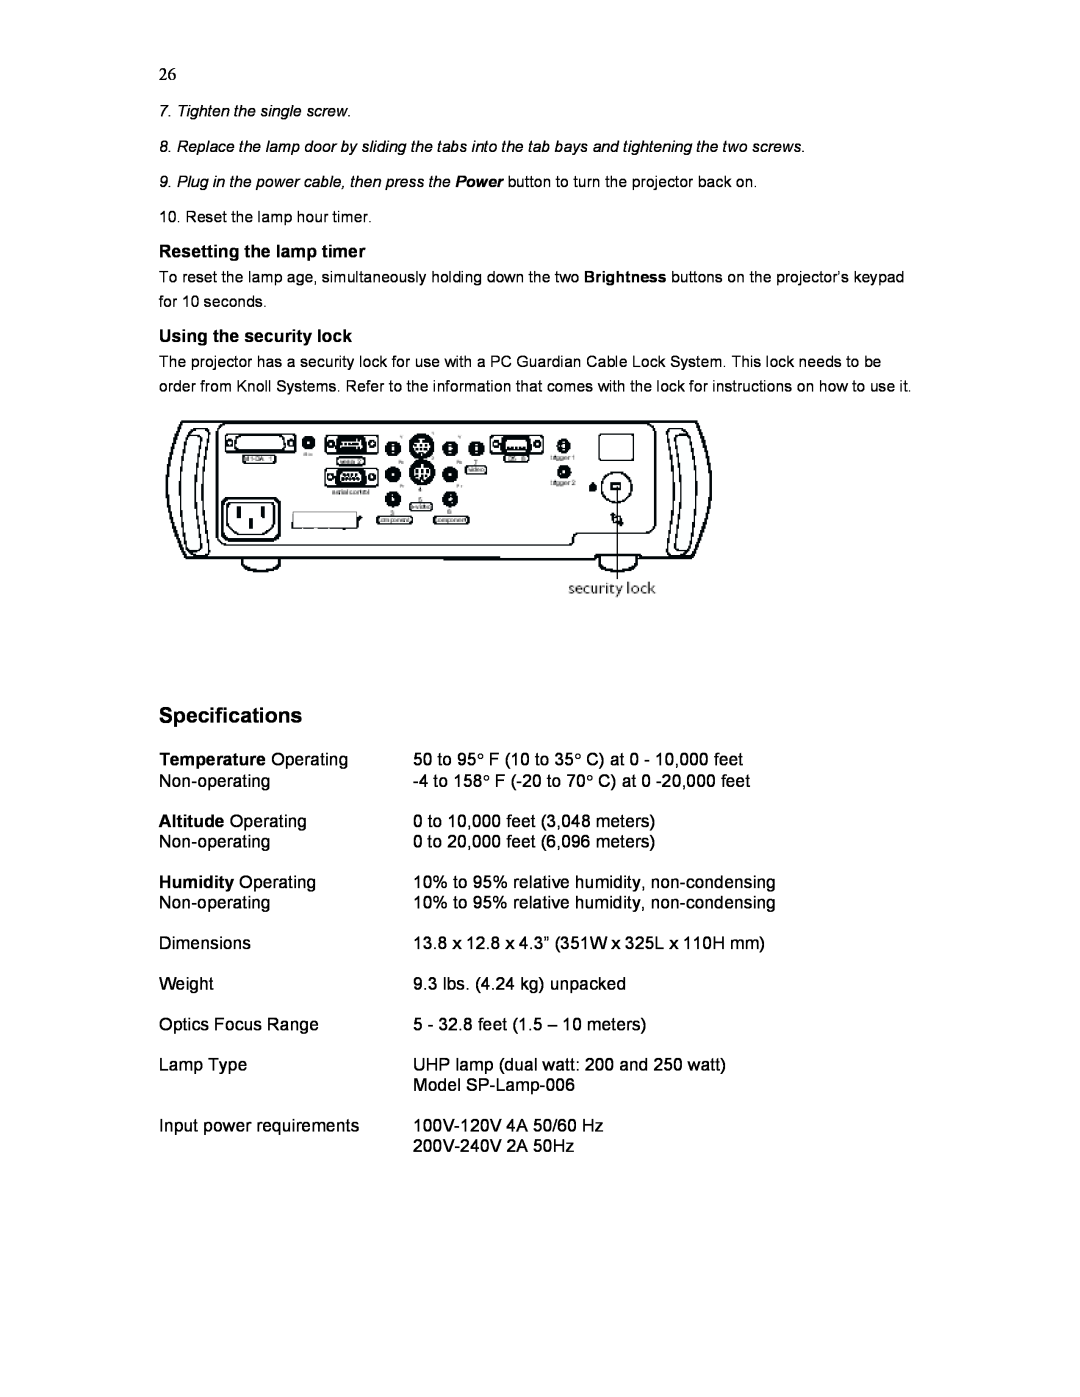 Knoll Systems HD177 user manual Specifications, Resetting the lamp timer, Using the security lock, Temperature Operating 